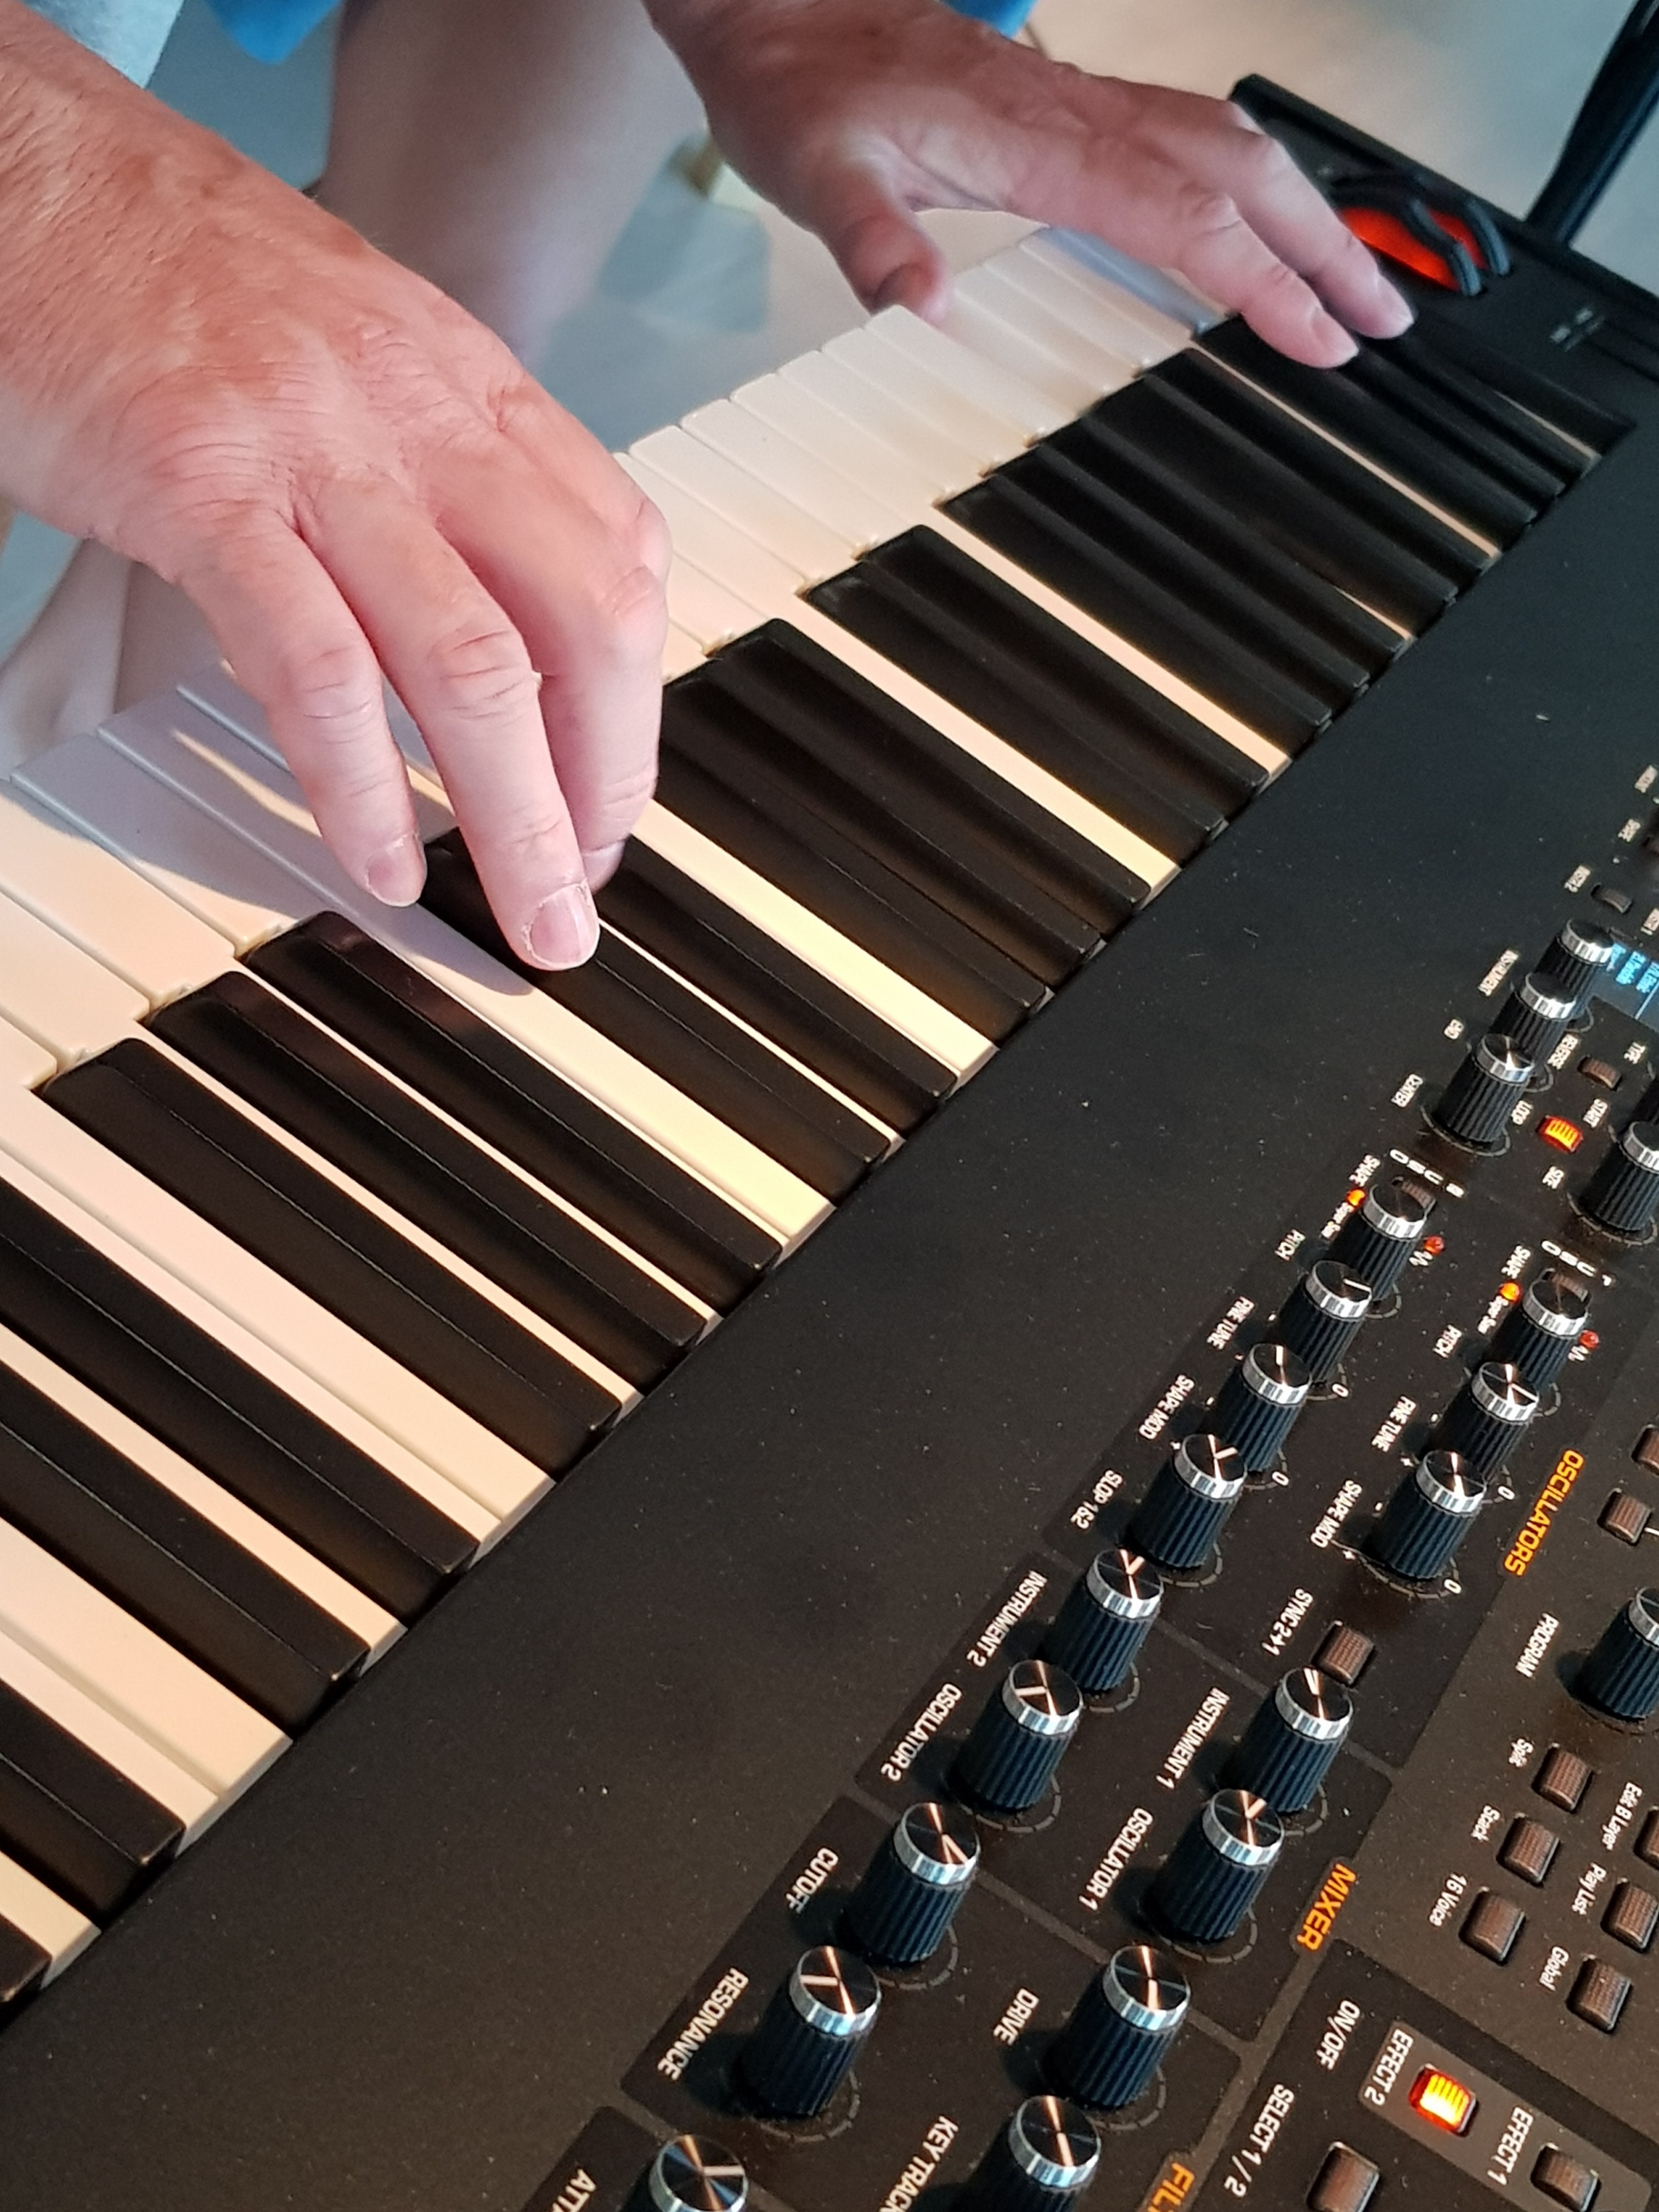 Hands on synthesizer